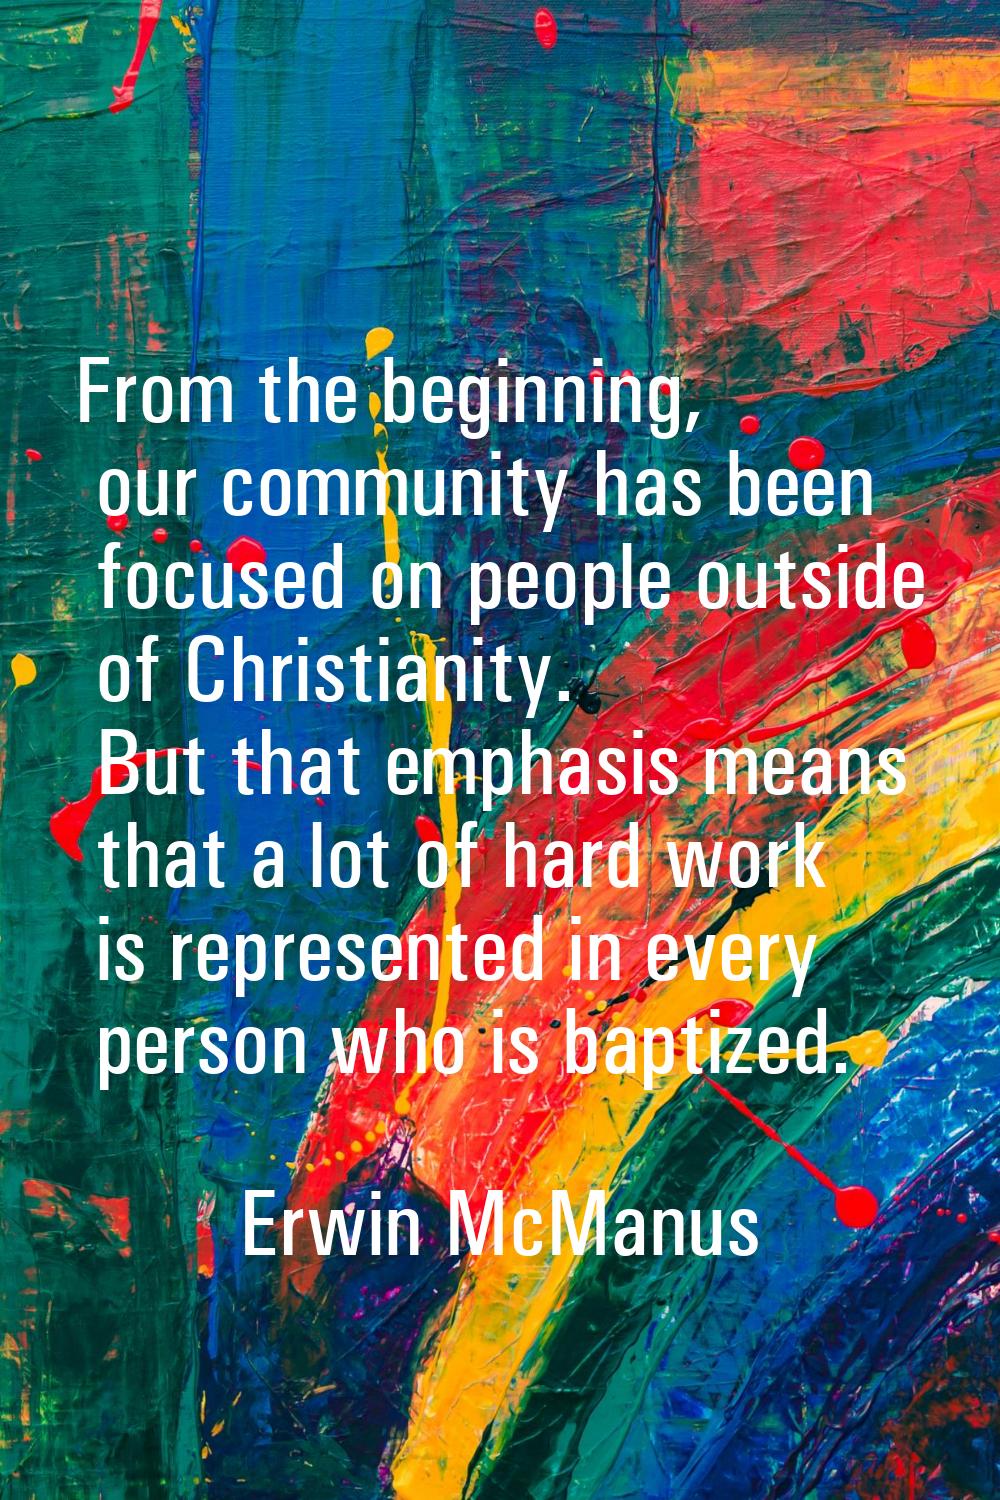 From the beginning, our community has been focused on people outside of Christianity. But that emph